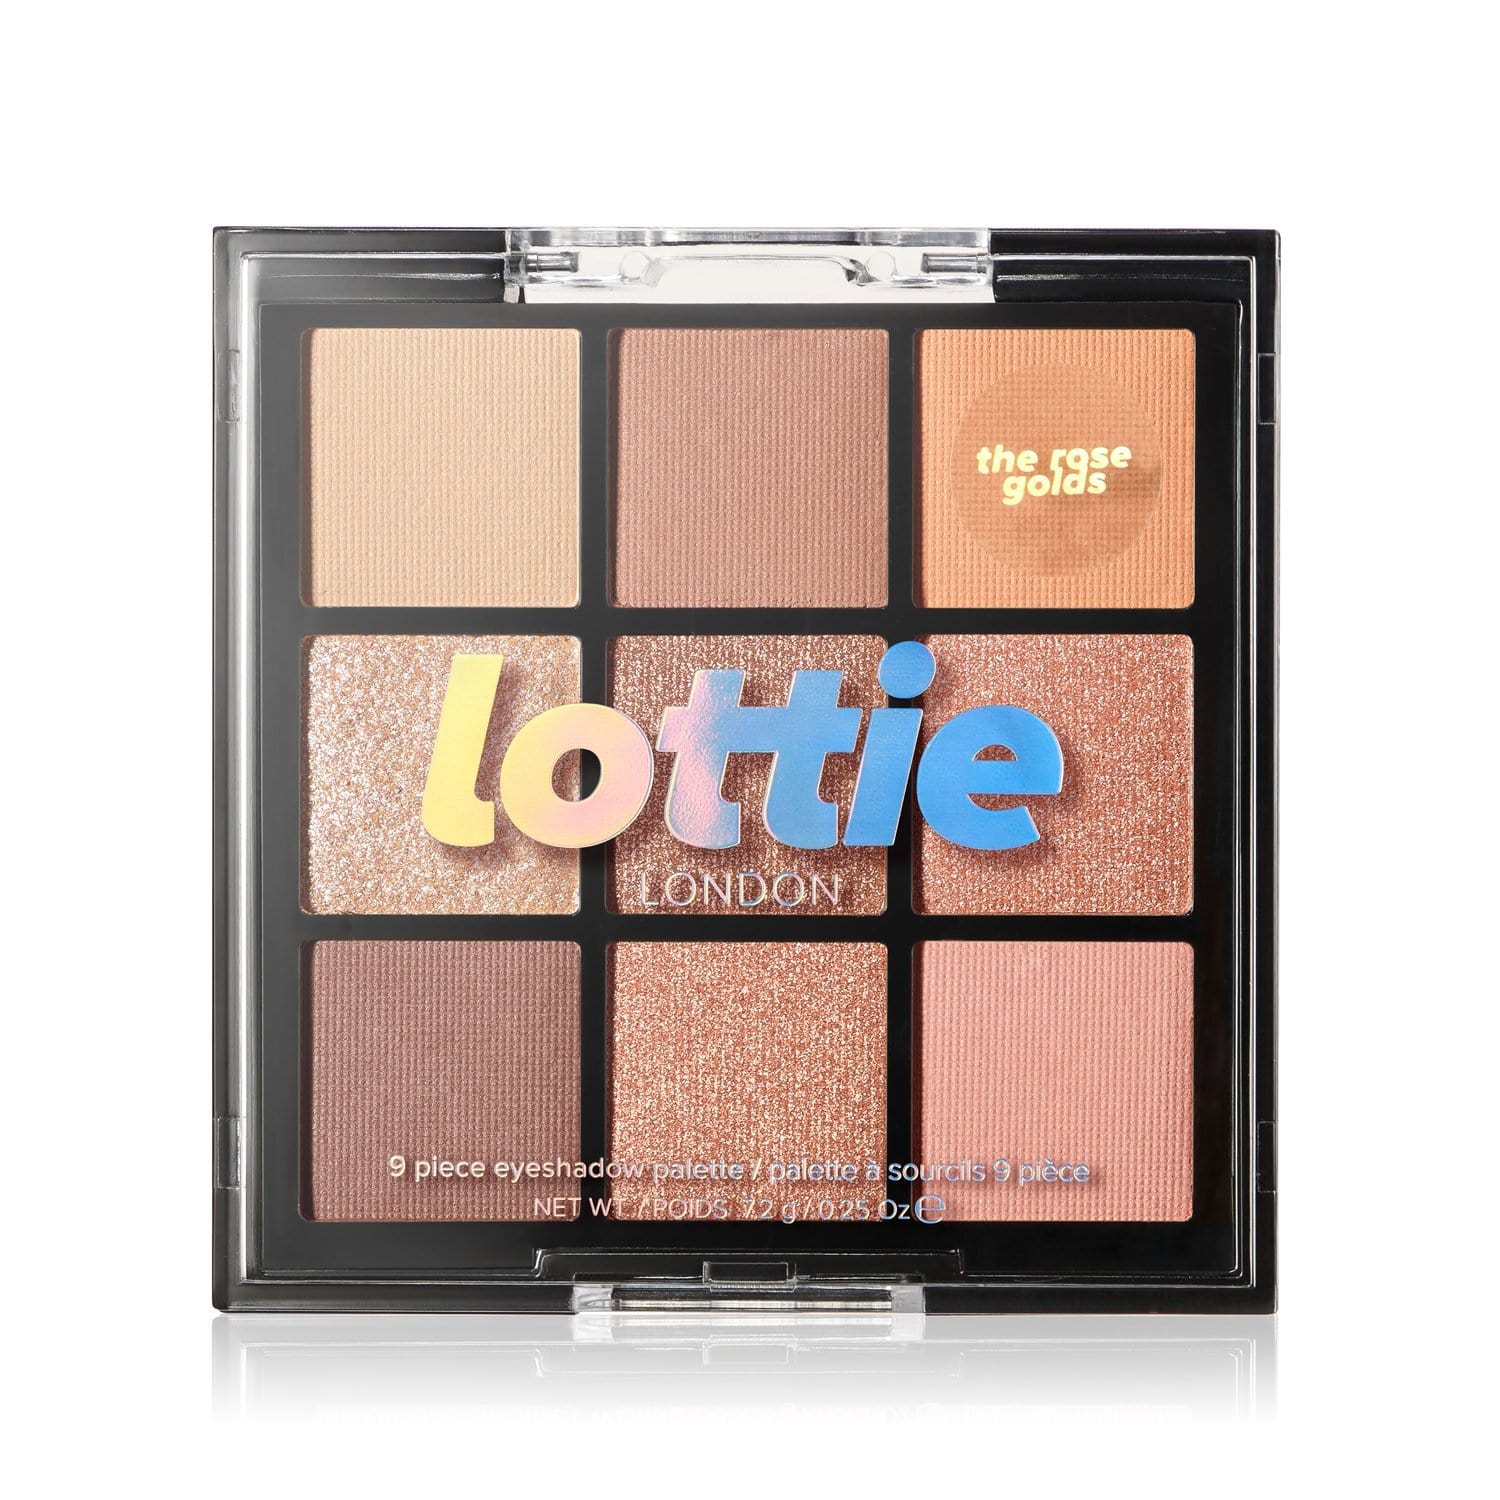 lottie palette - the rose golds Makeup 9 shade eyeshadow palette